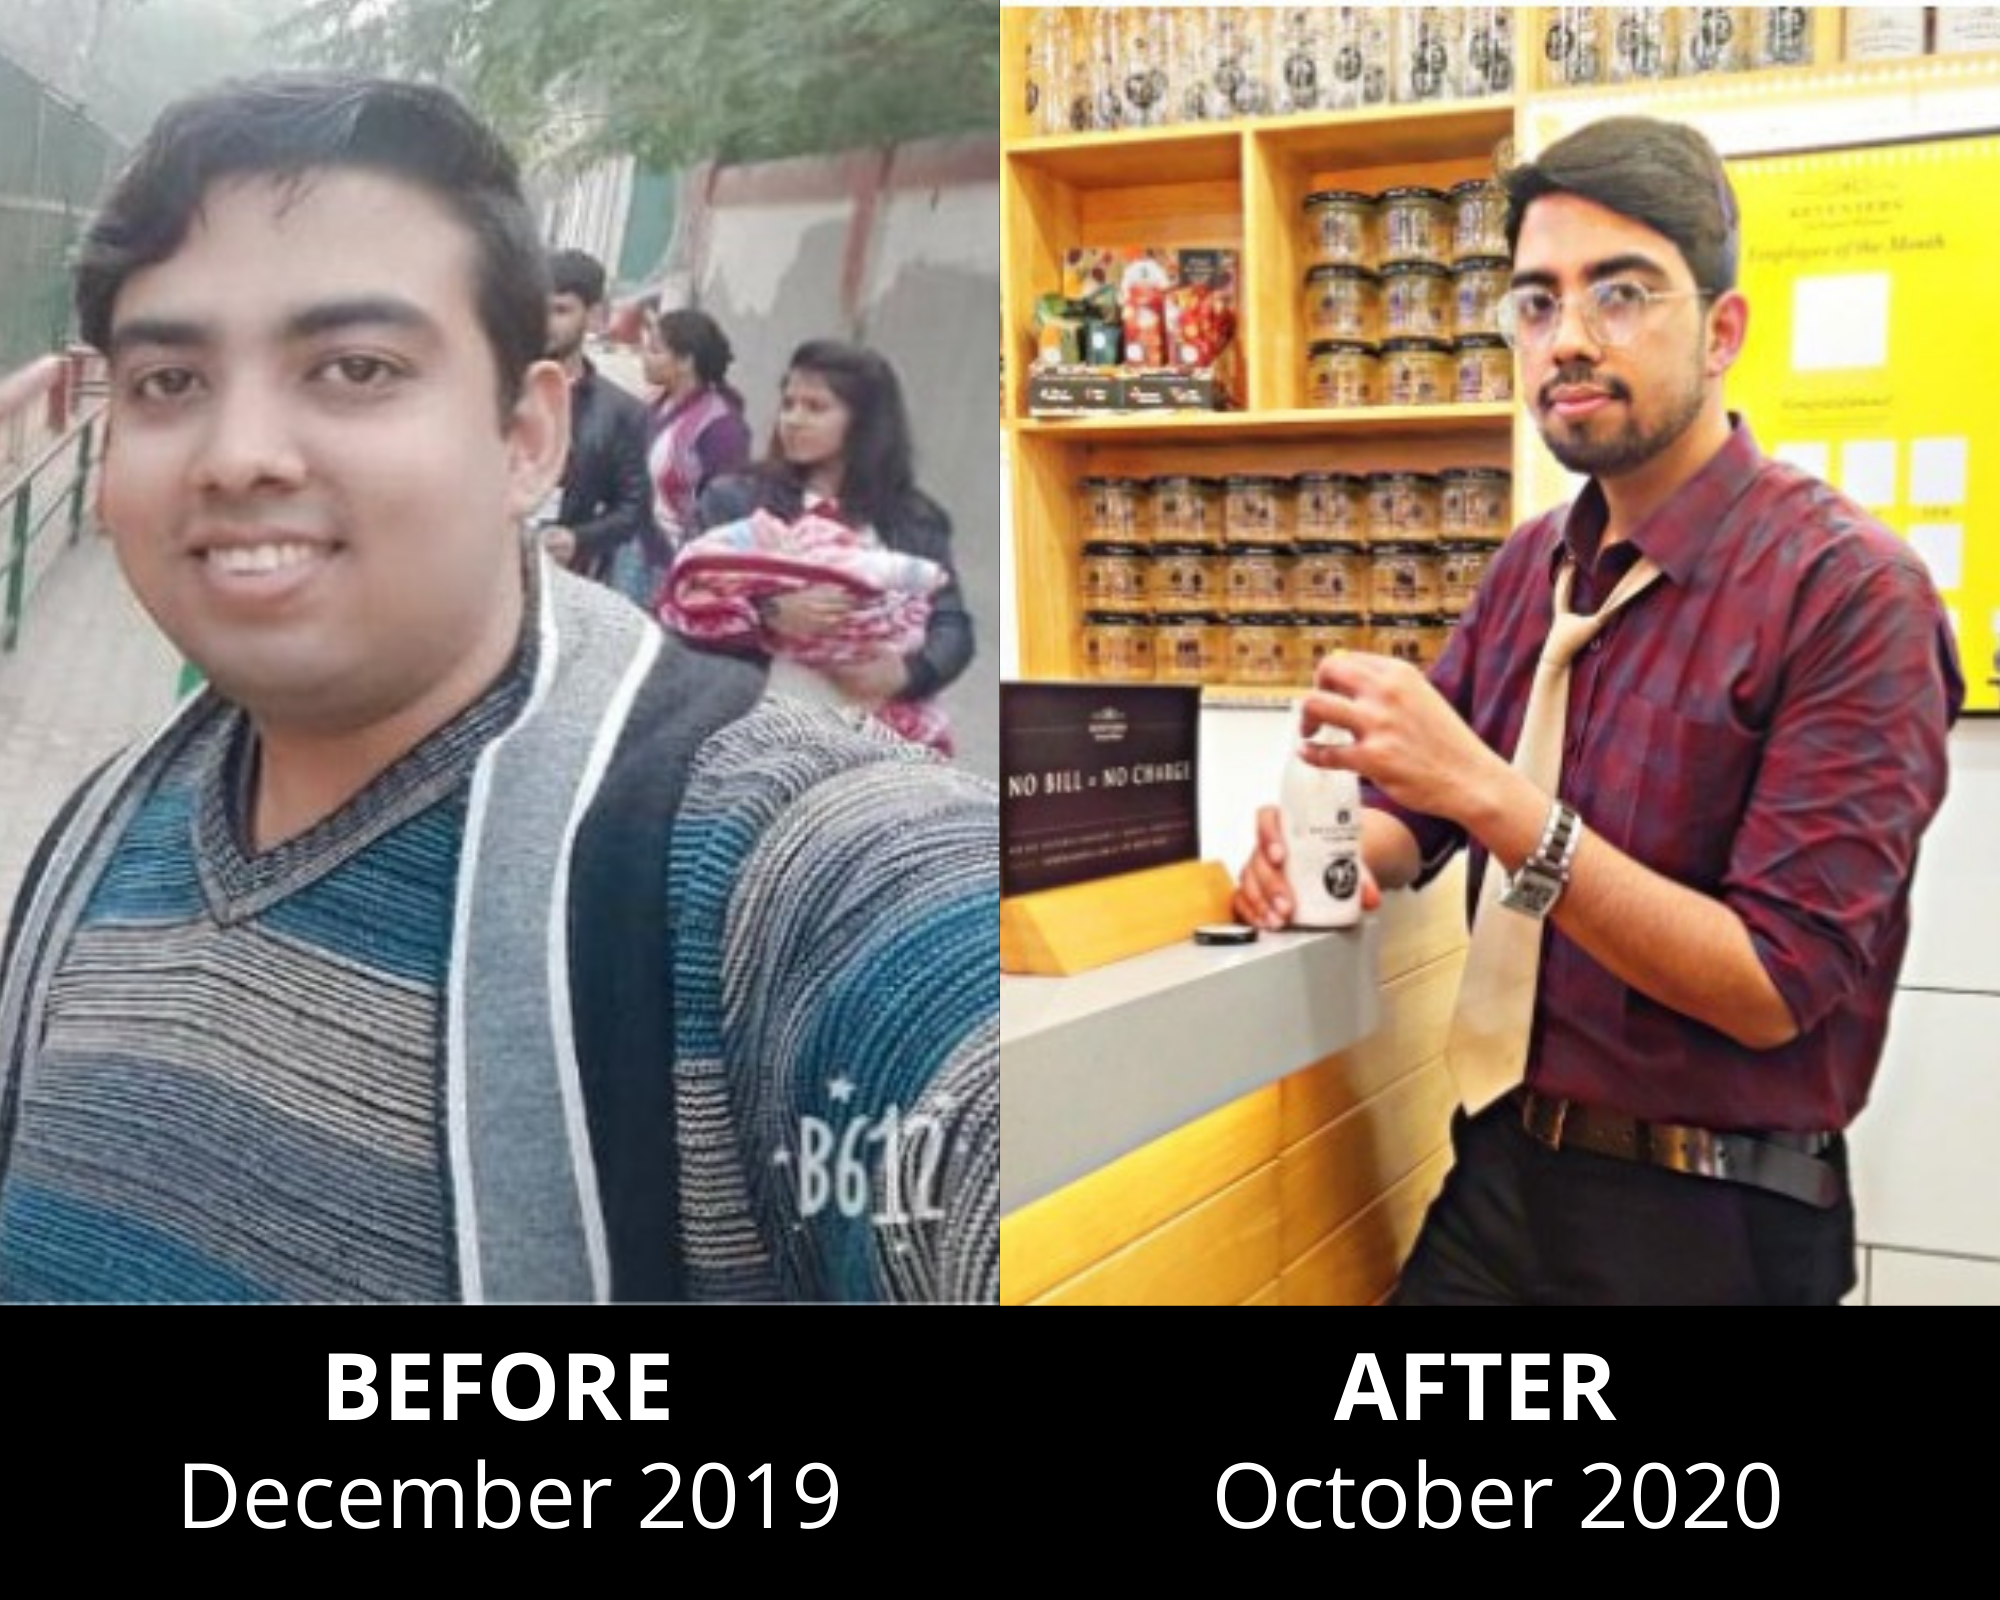 Avinash fought 1 battle but won 3 wars. He reversed thyroid, bronchitis and obesity within 6 months.